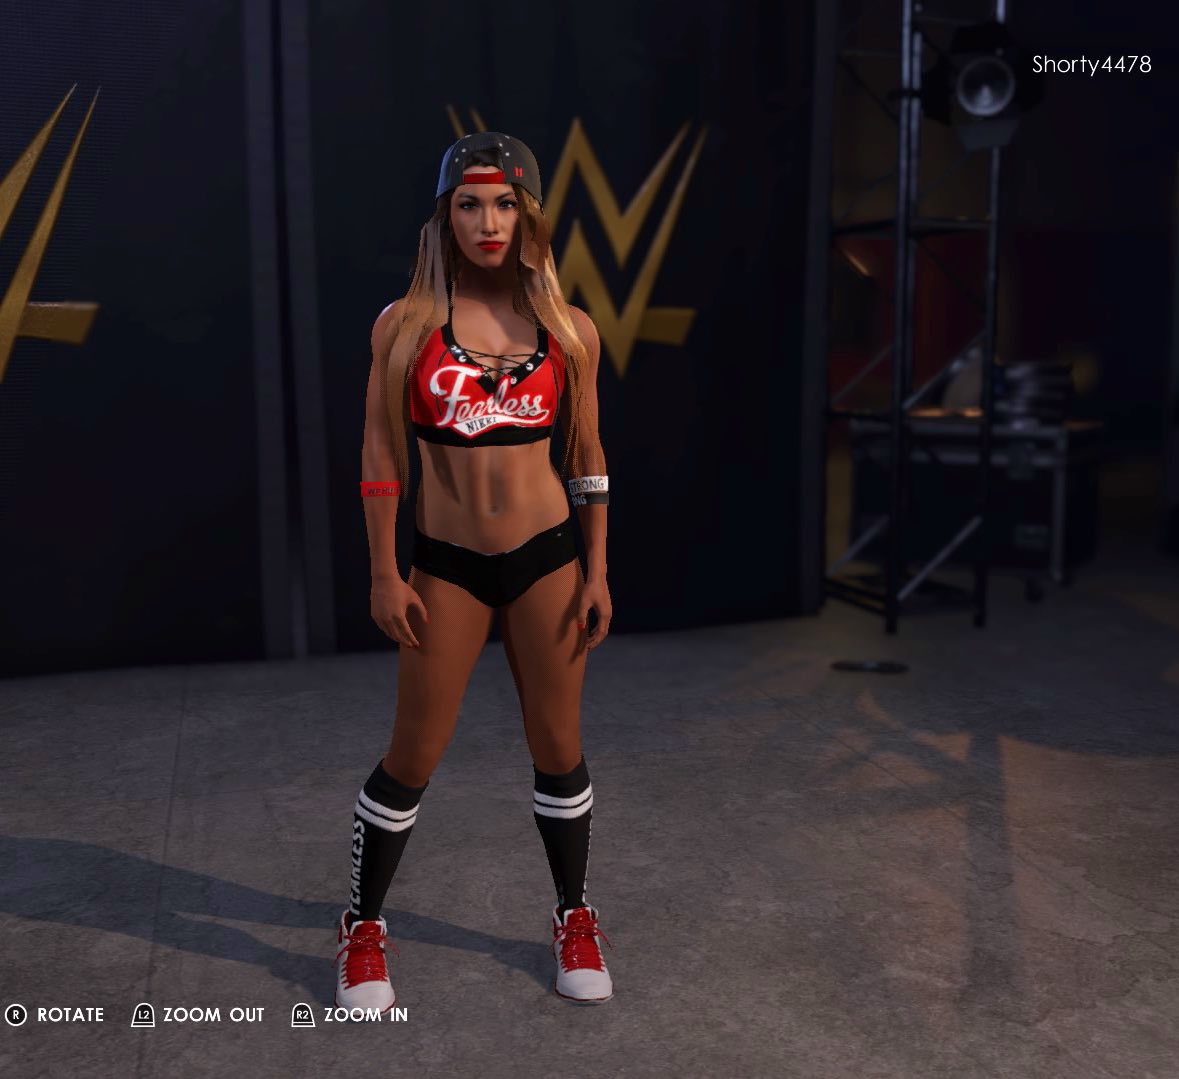 Fearless Nikki Bella is now up for download in WWE 2k22 by me! Comes with full move set, entrance/victory, render and 3 attires! #nikkibella #WWERaw #wwesmackdown #divas #WWE2k22 @BellaTwins https://t.co/5Zpl4SRvA5